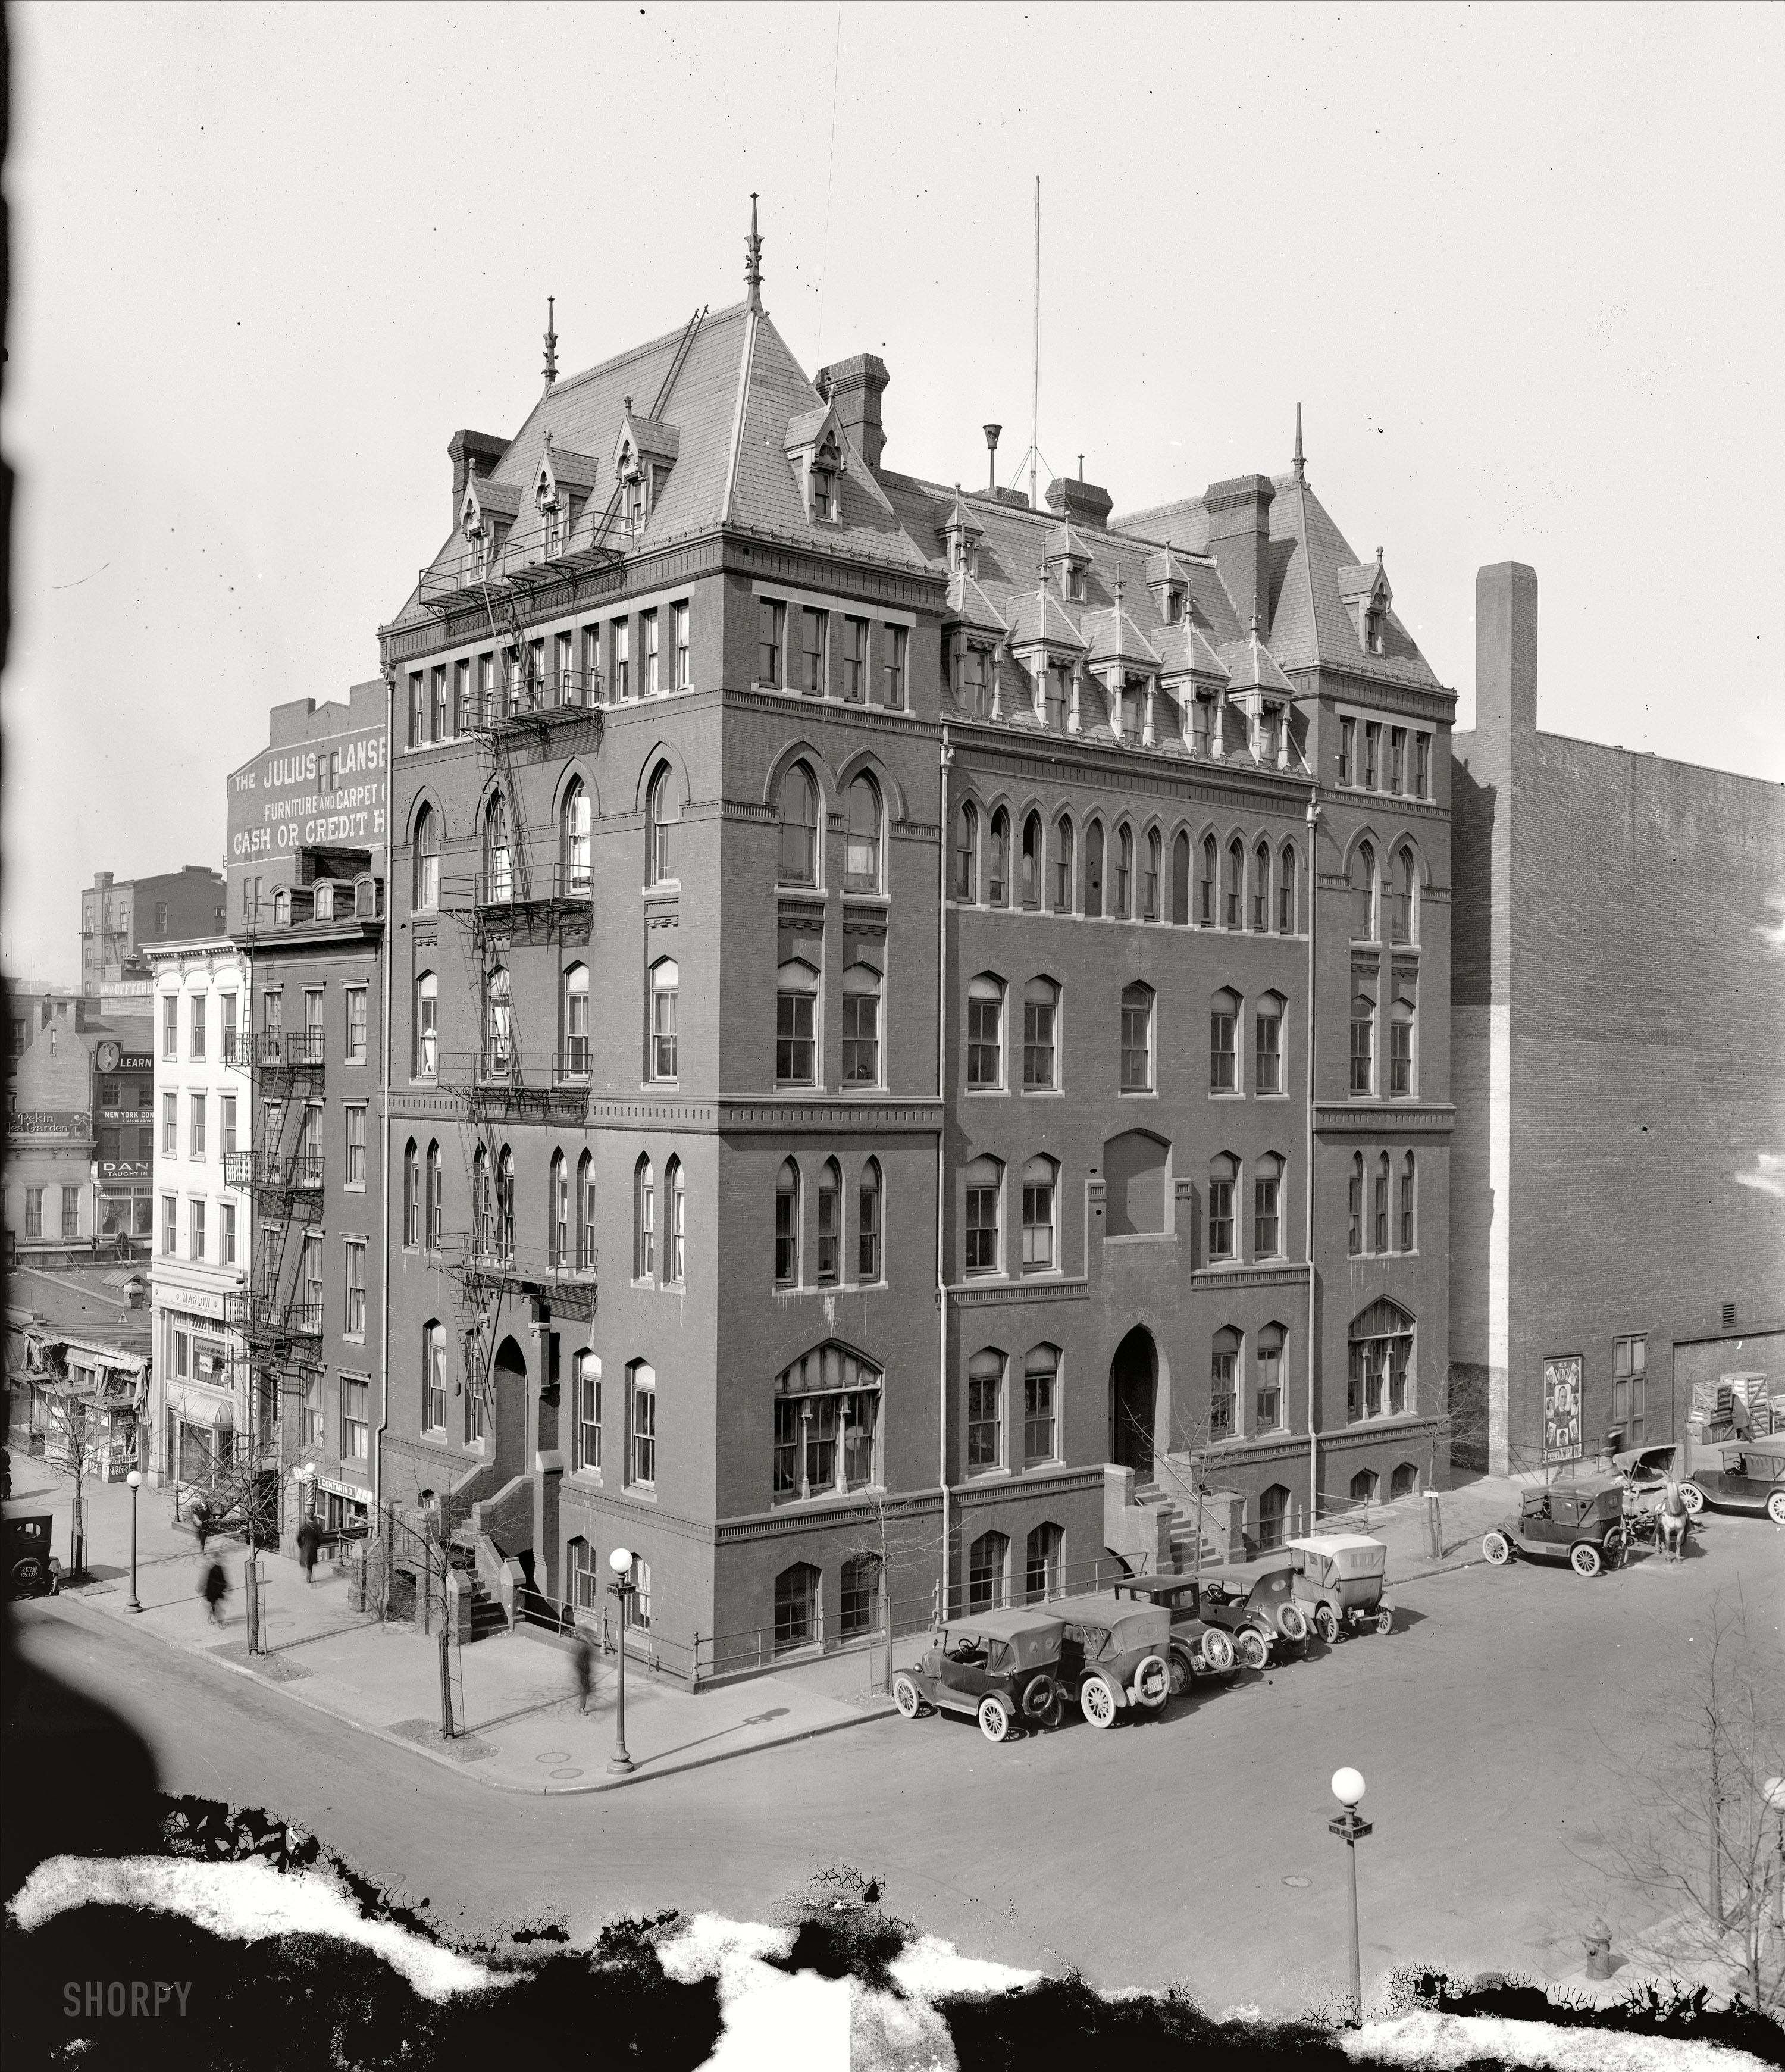 Washington, D.C, circa 1920. "Salvation Army." At the intersection of E and Eighth streets N.W. Harris & Ewing Collection glass negative. View full size.